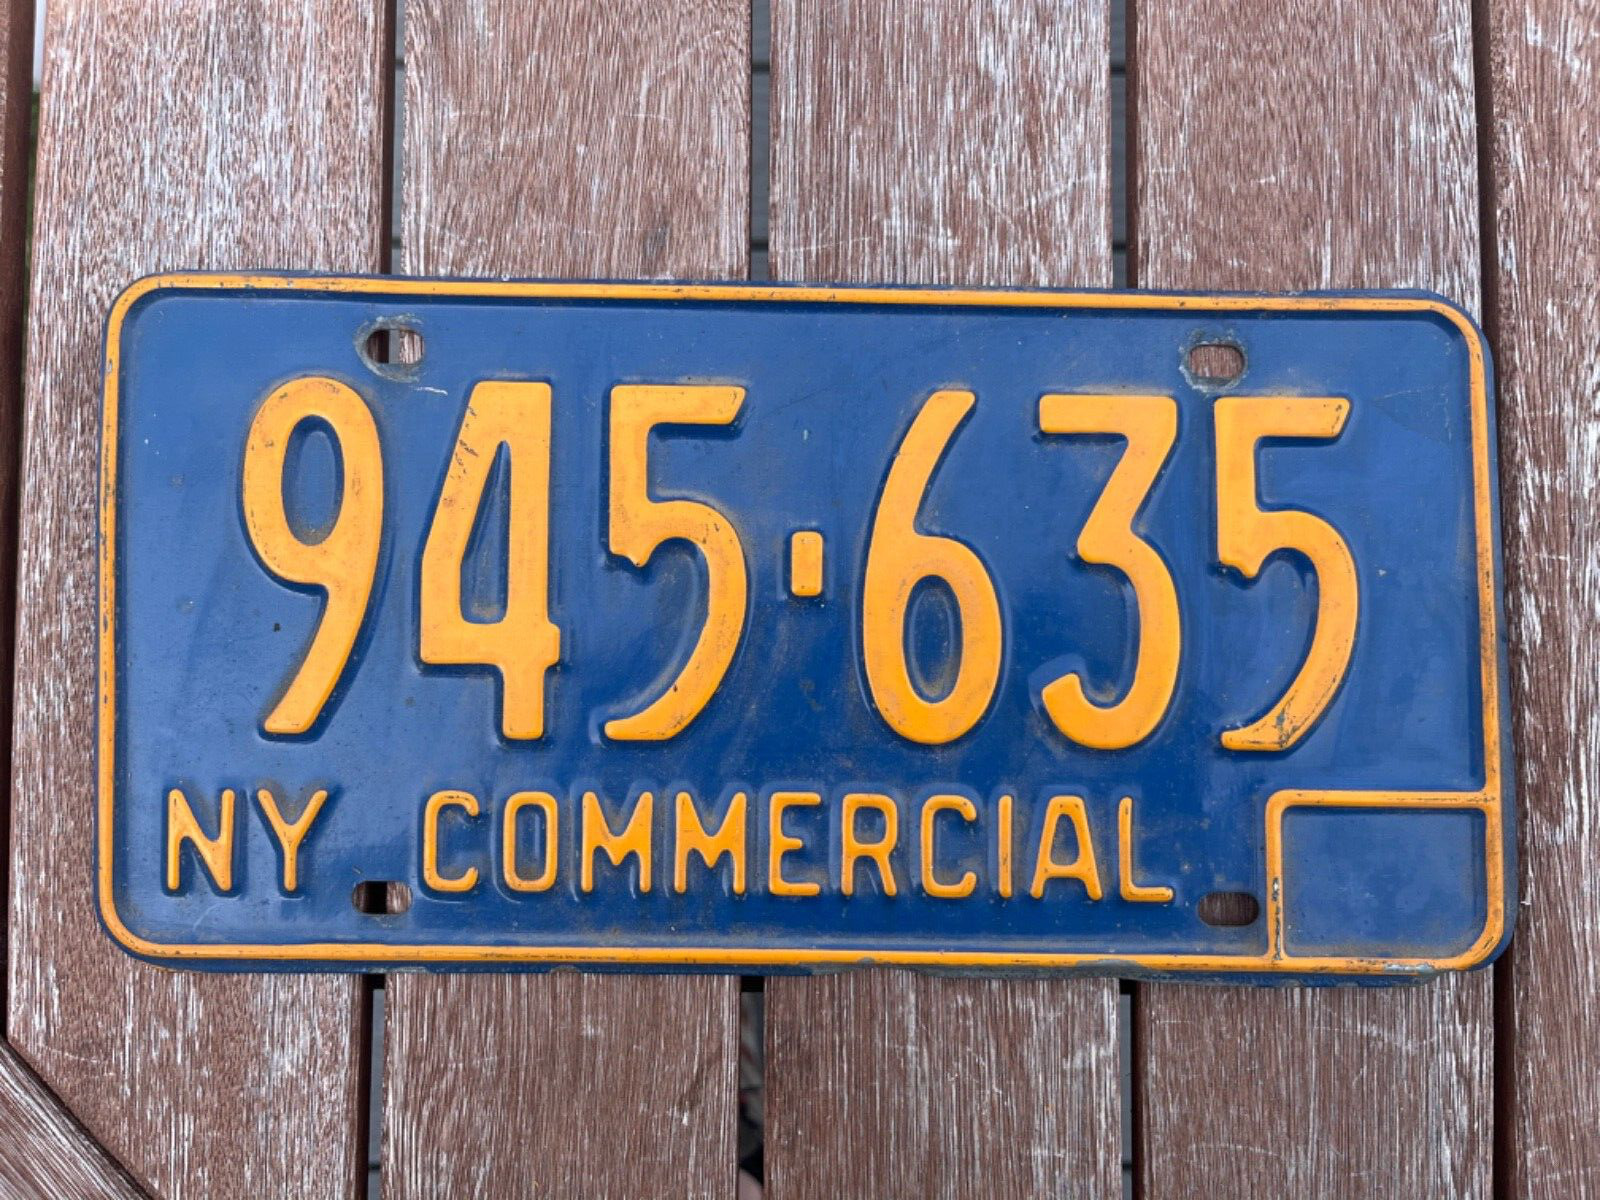 1966-73 New York Commercial License Plate 945 635